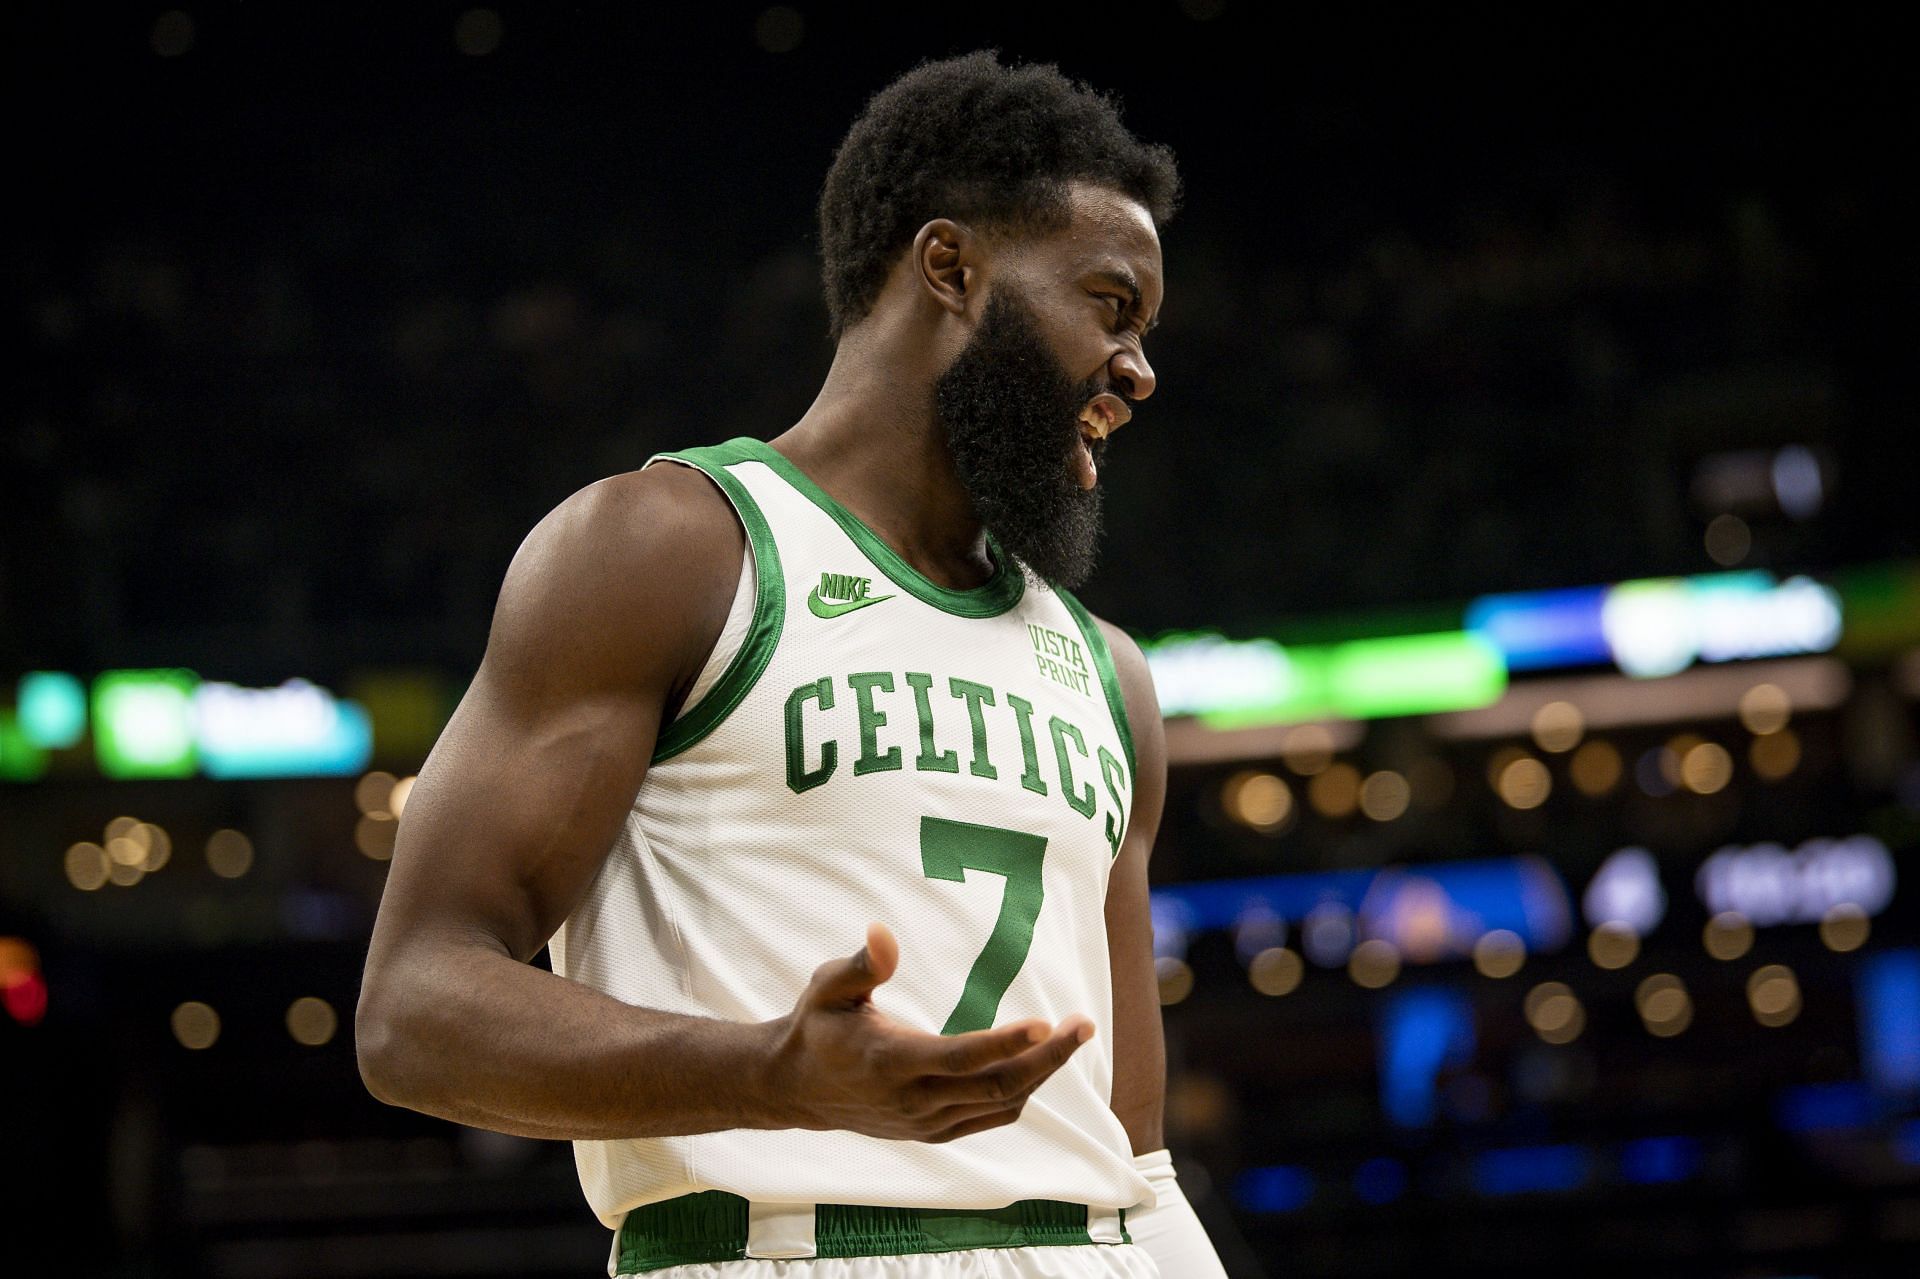 Jaylen Brown led the Boston Celtics in scoring in the game against Cleveland